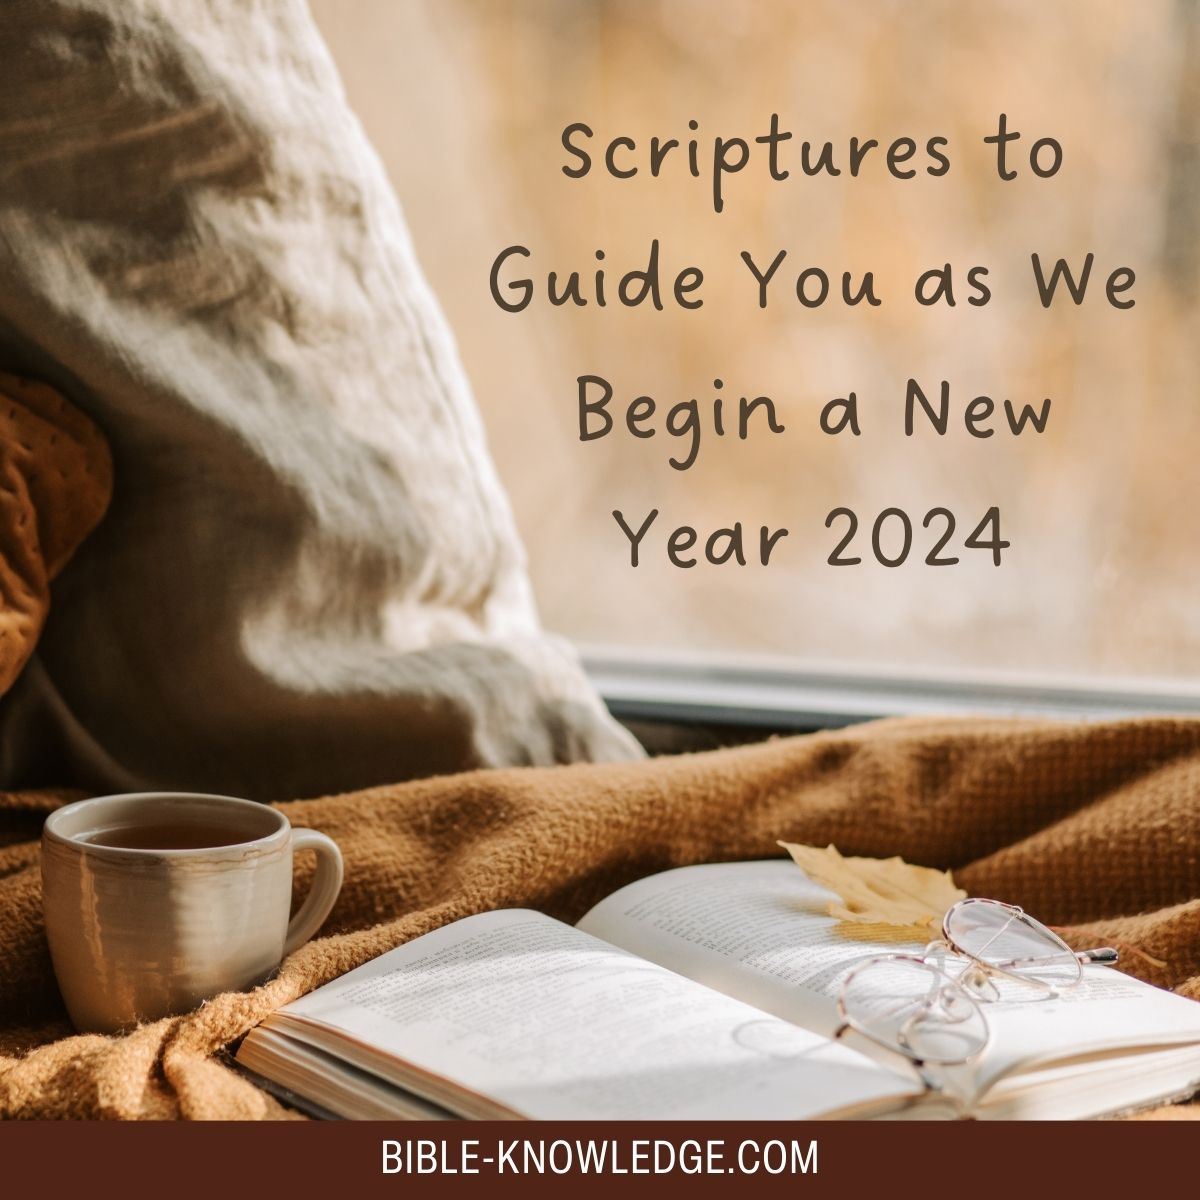 Scriptures to Guide You as We Begin a New Year